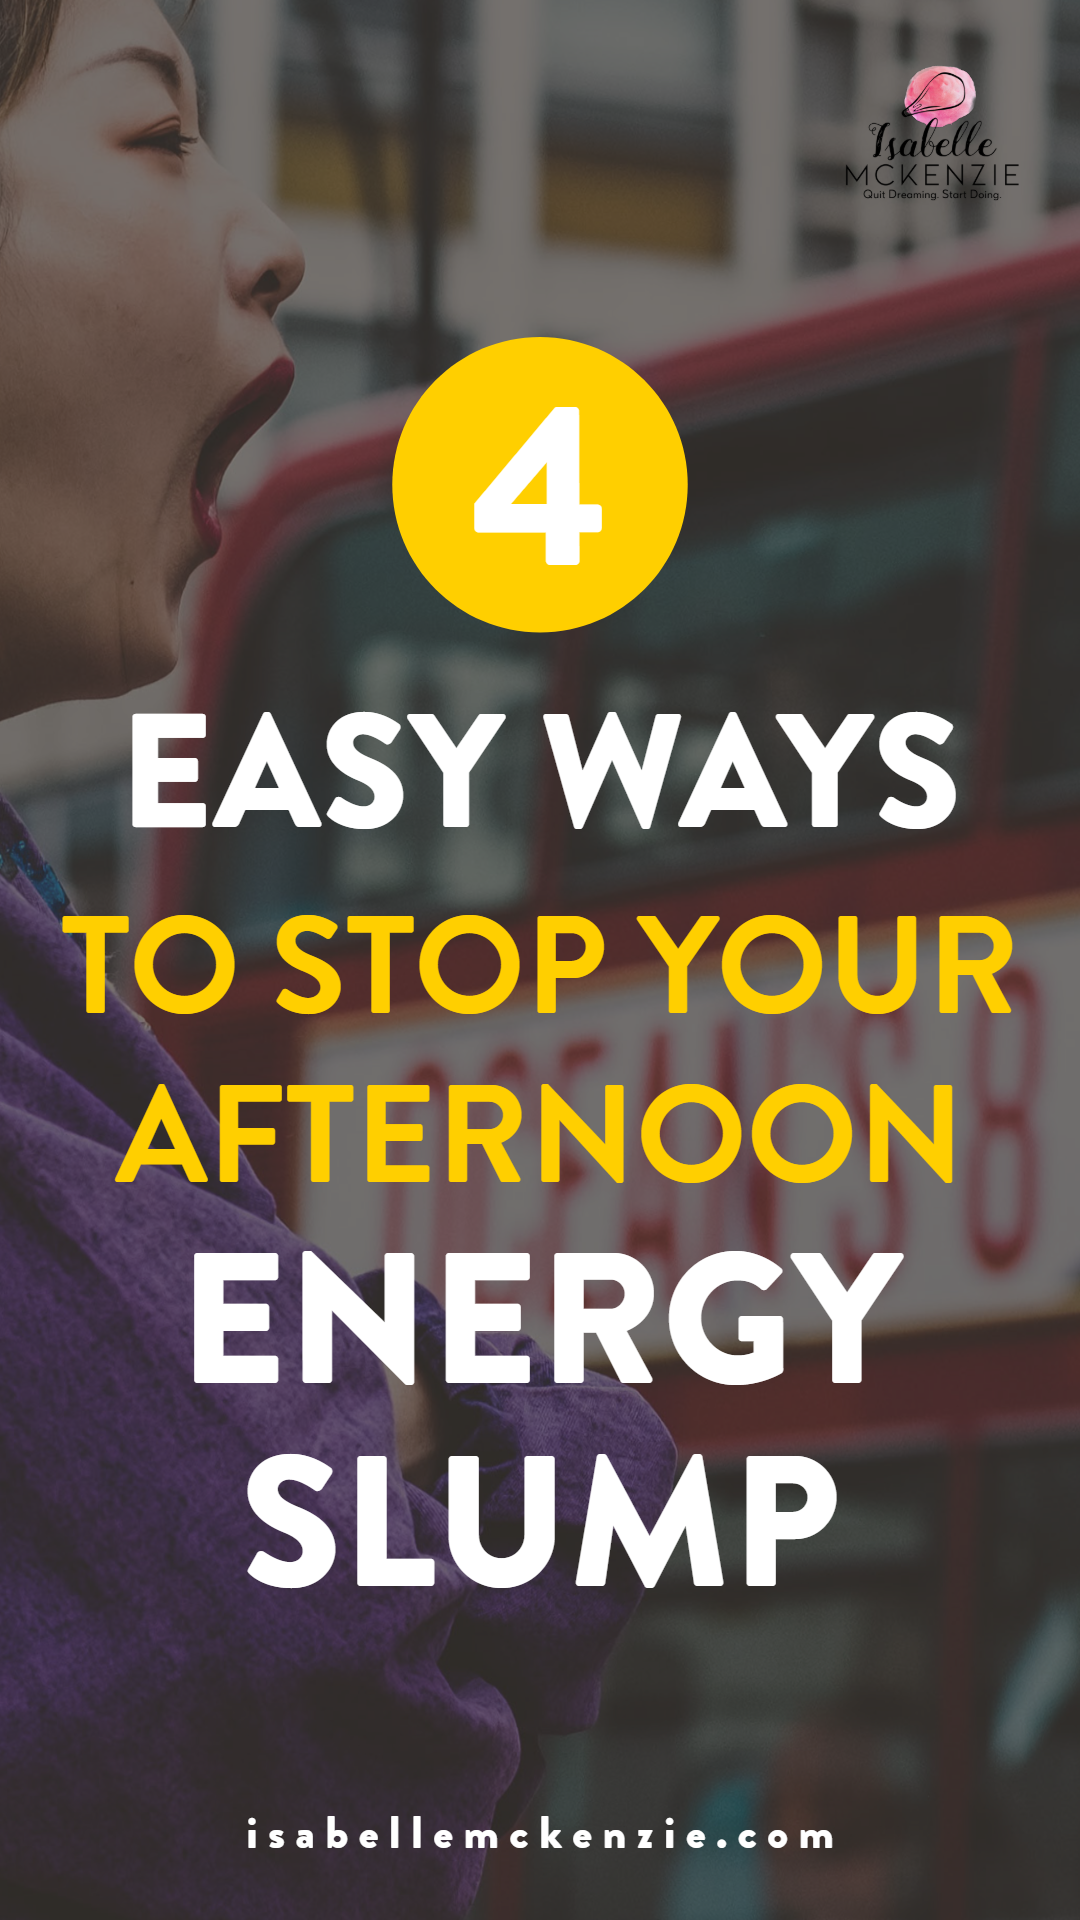 4 Easy Ways to Stop Your Afternoon Energy Slump - Isabelle McKenzie